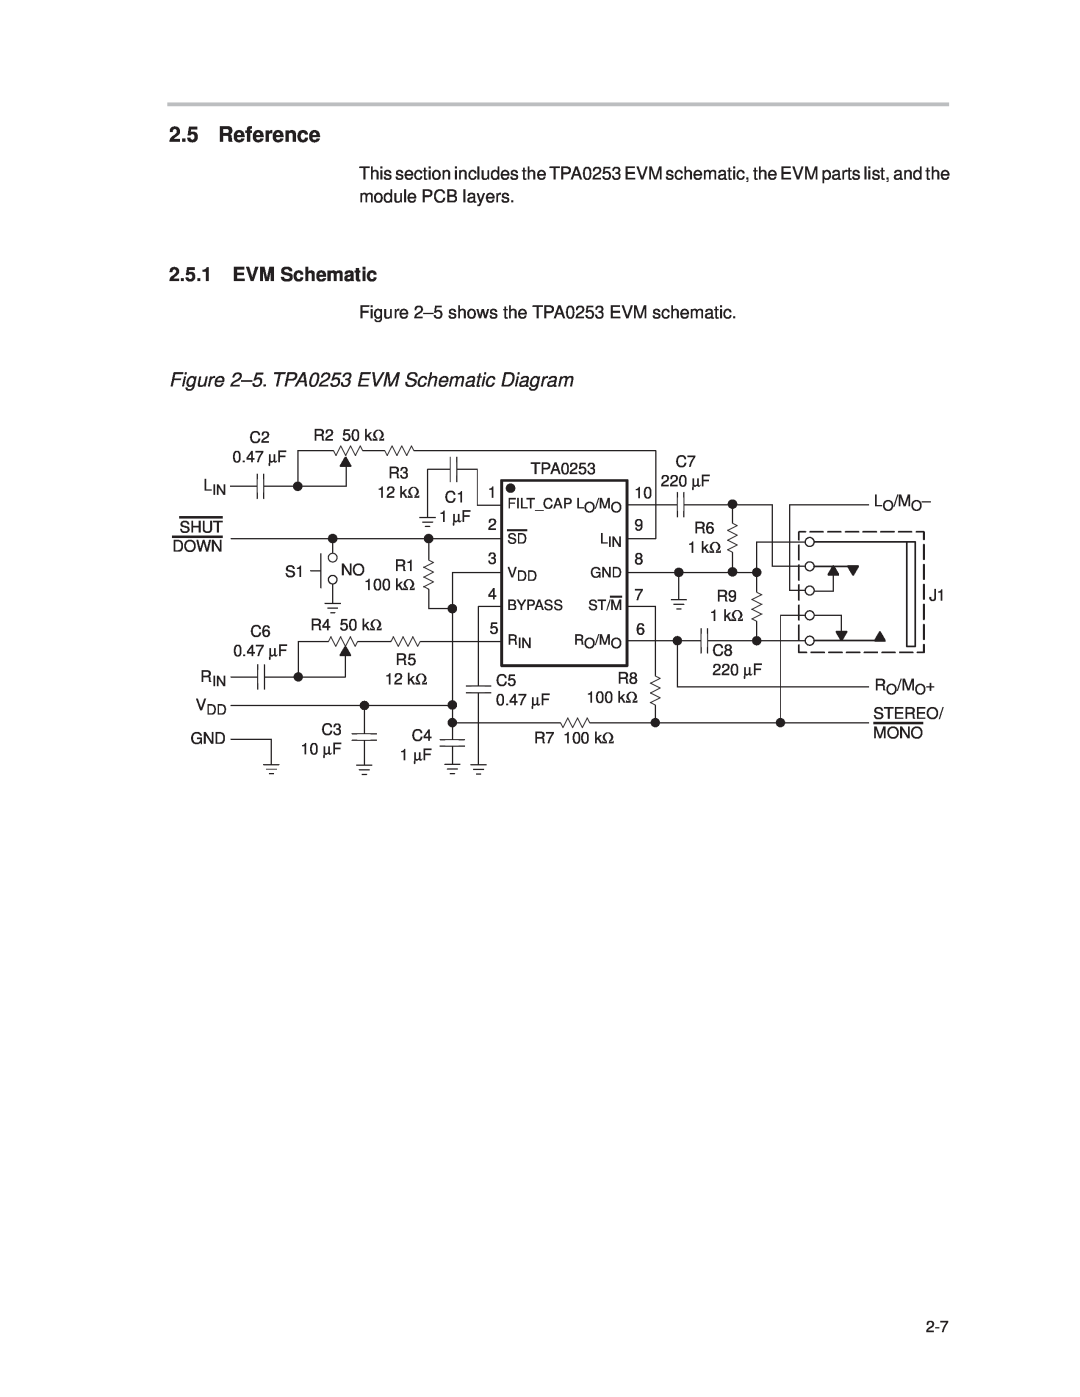 Texas Instruments manual Reference, 2.5.1EVM Schematic, ±5. TPA0253 EVM Schematic Diagram 